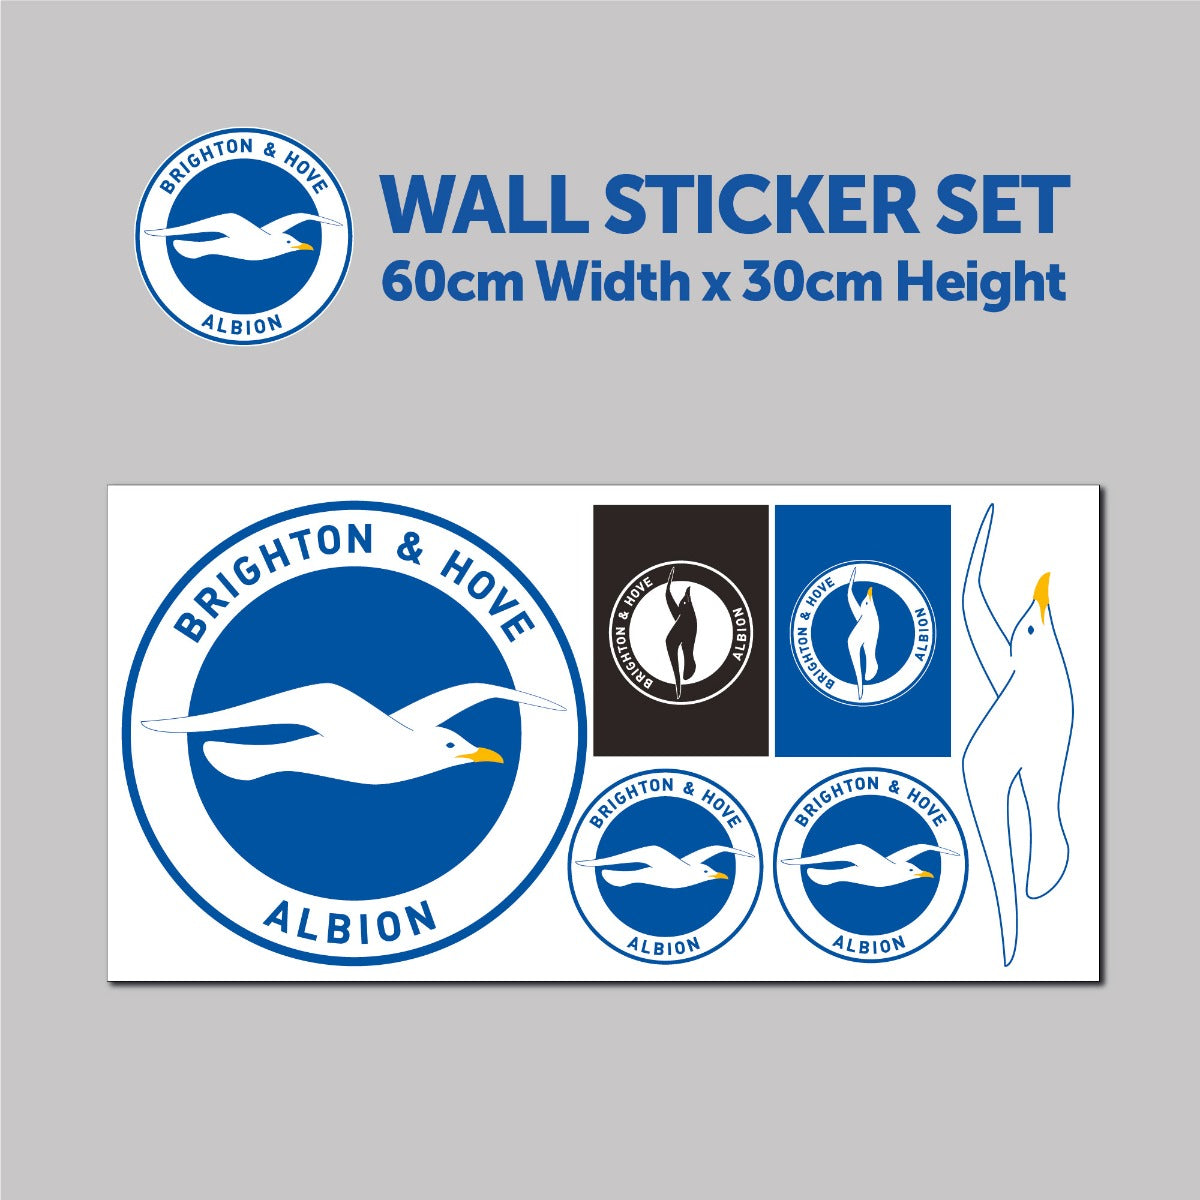 Brighton and Hove Albion FC Amex Stadium Day Time Smashed Wall Sticker